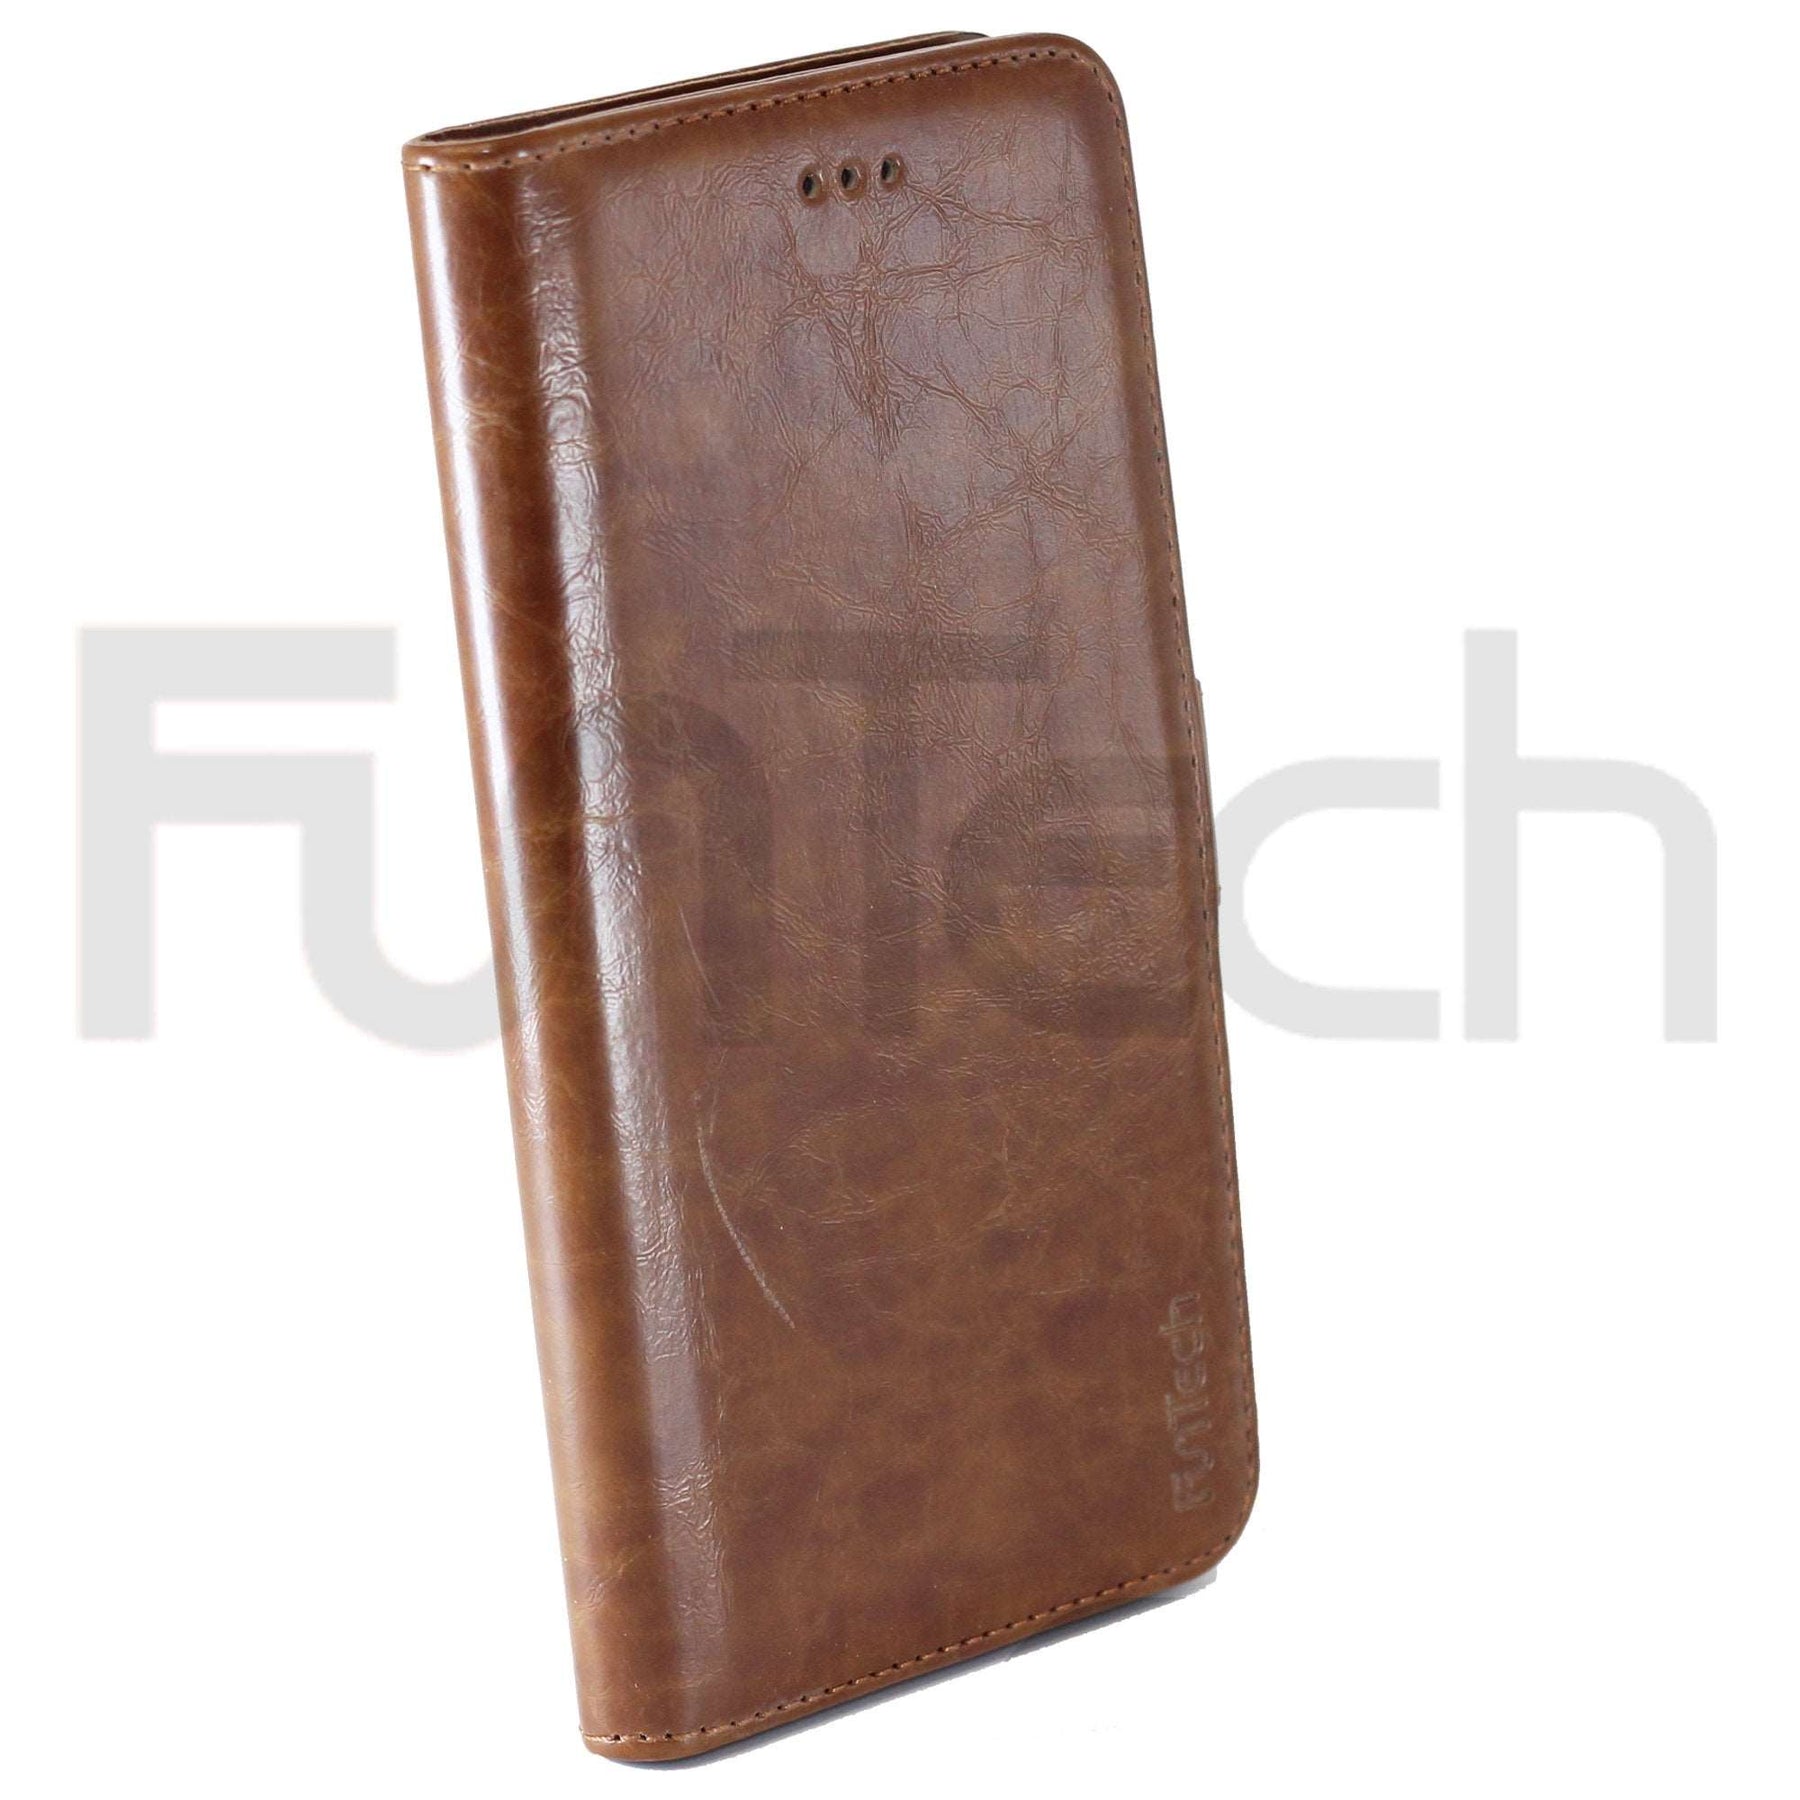 Apple iPhone 6 Plus Leather Wallet Case Brown